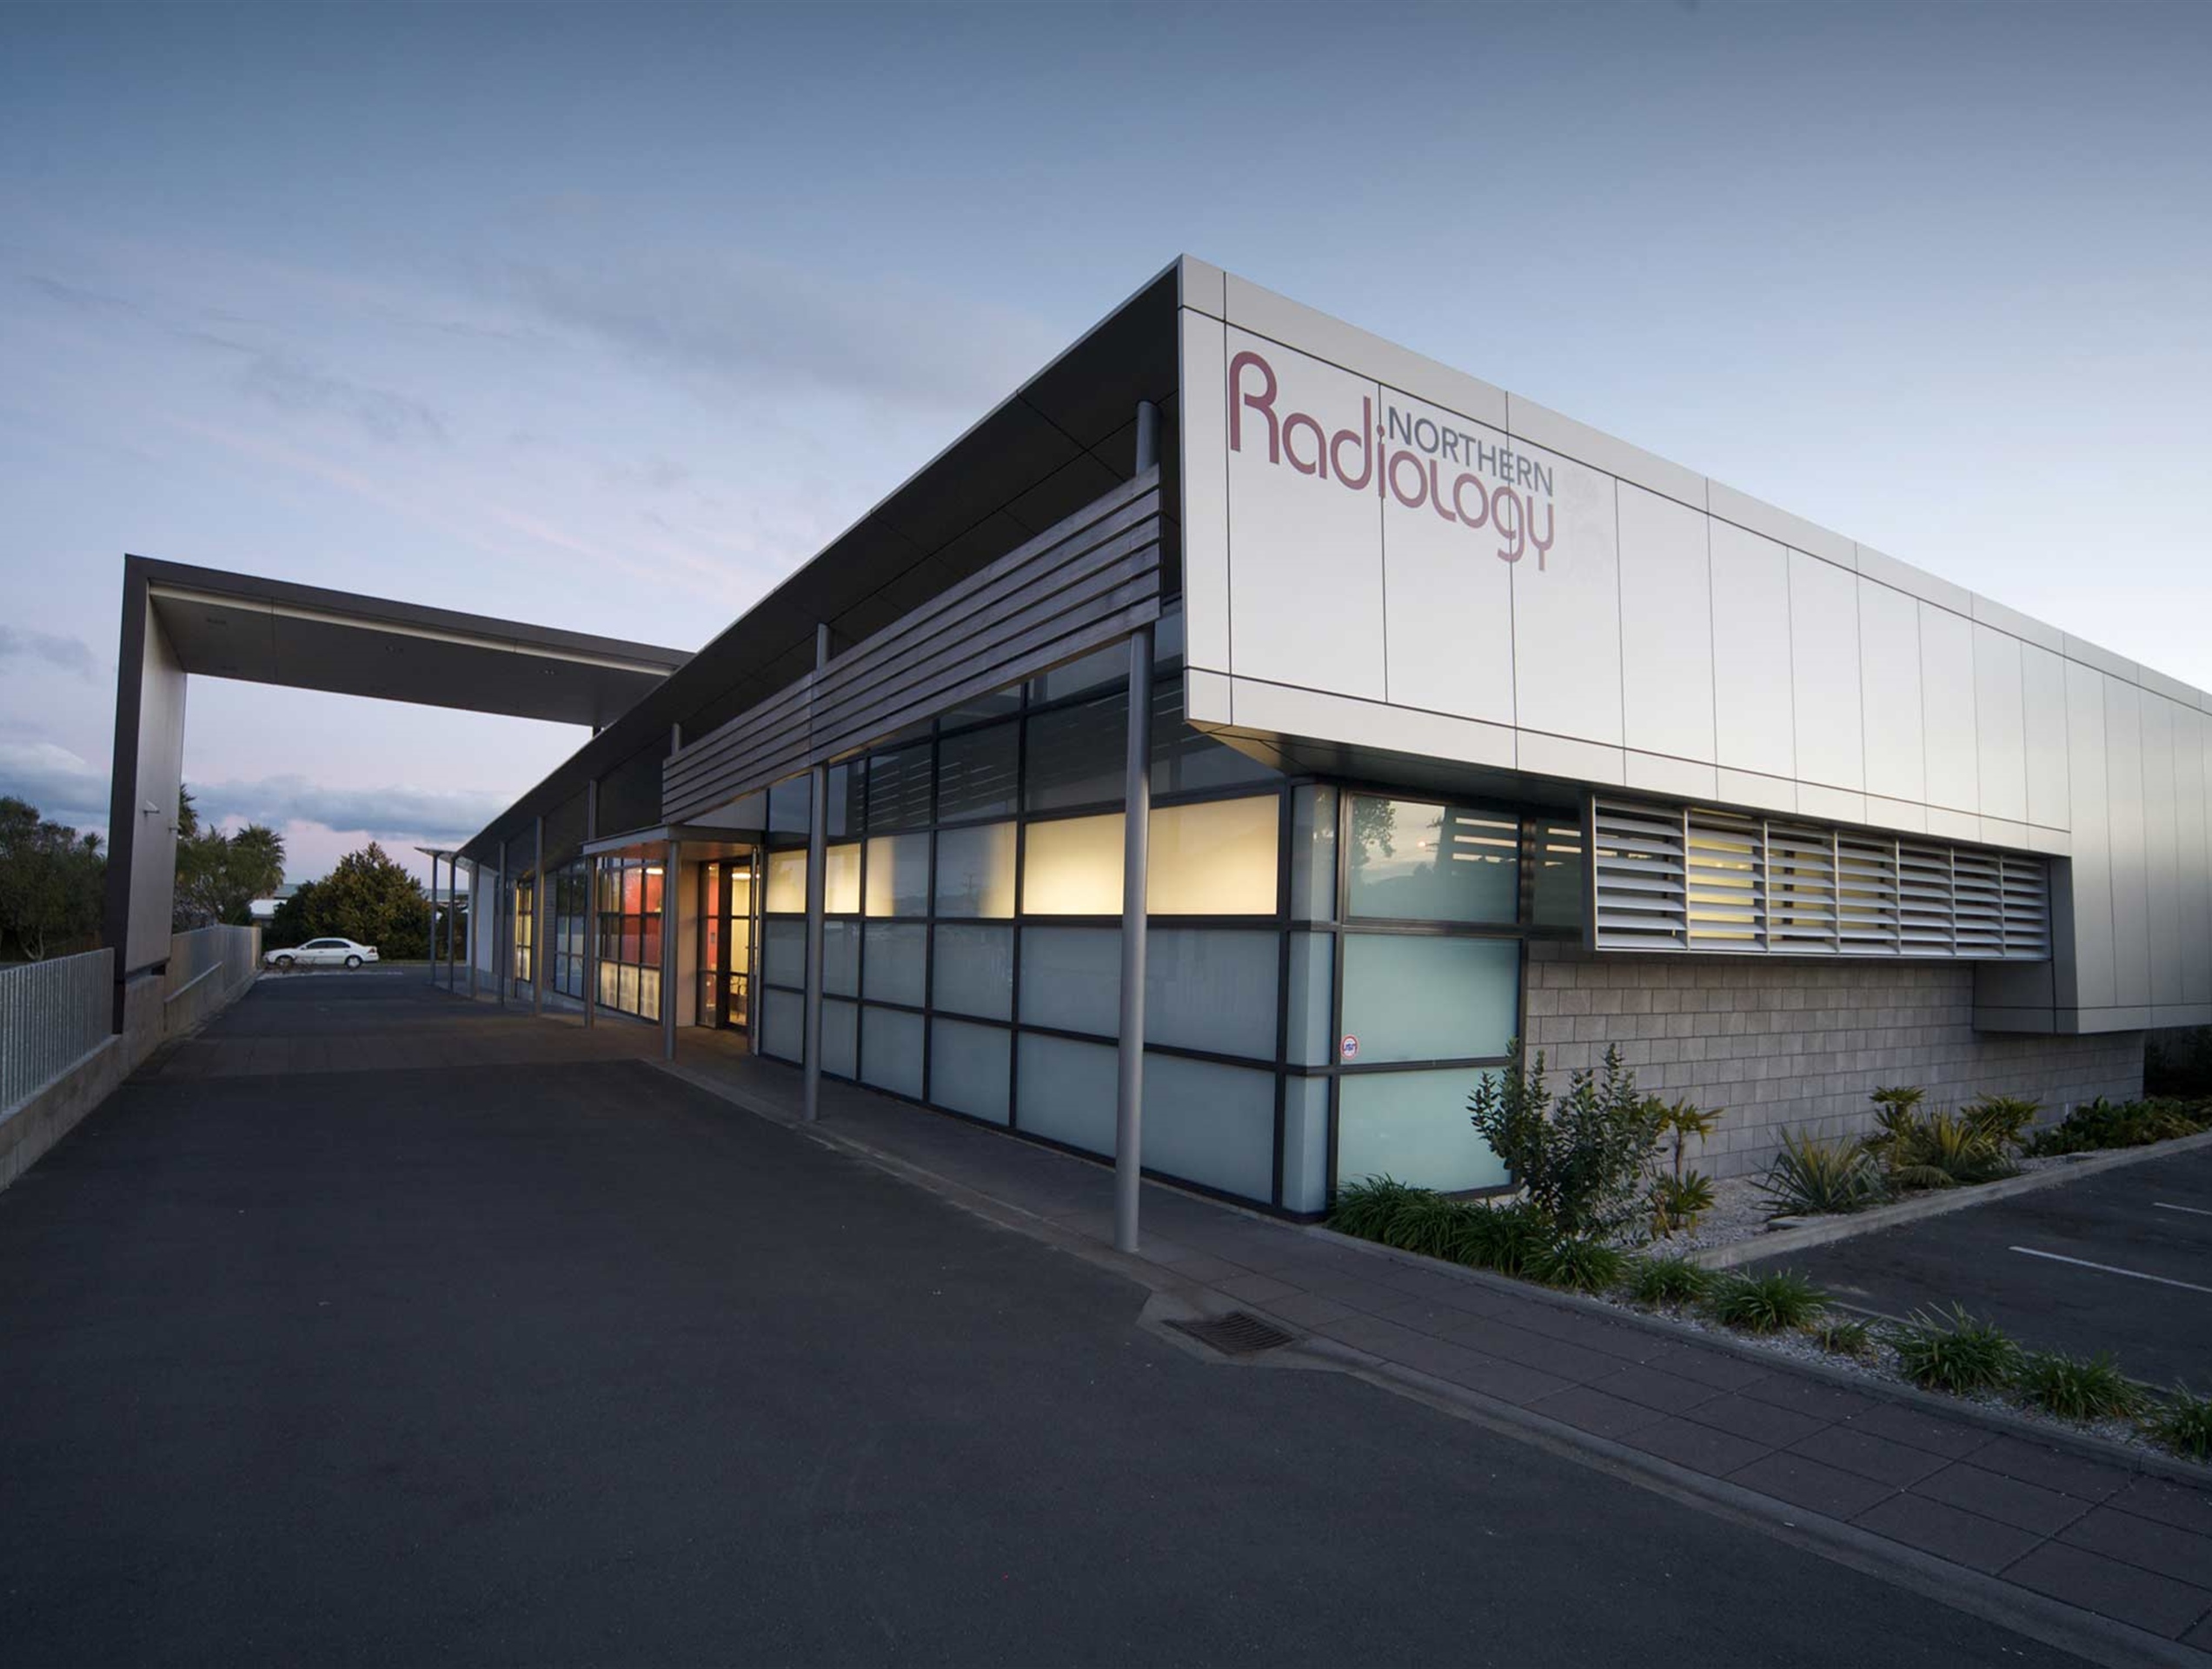 Commercial design in Whangarei - Northern radiology